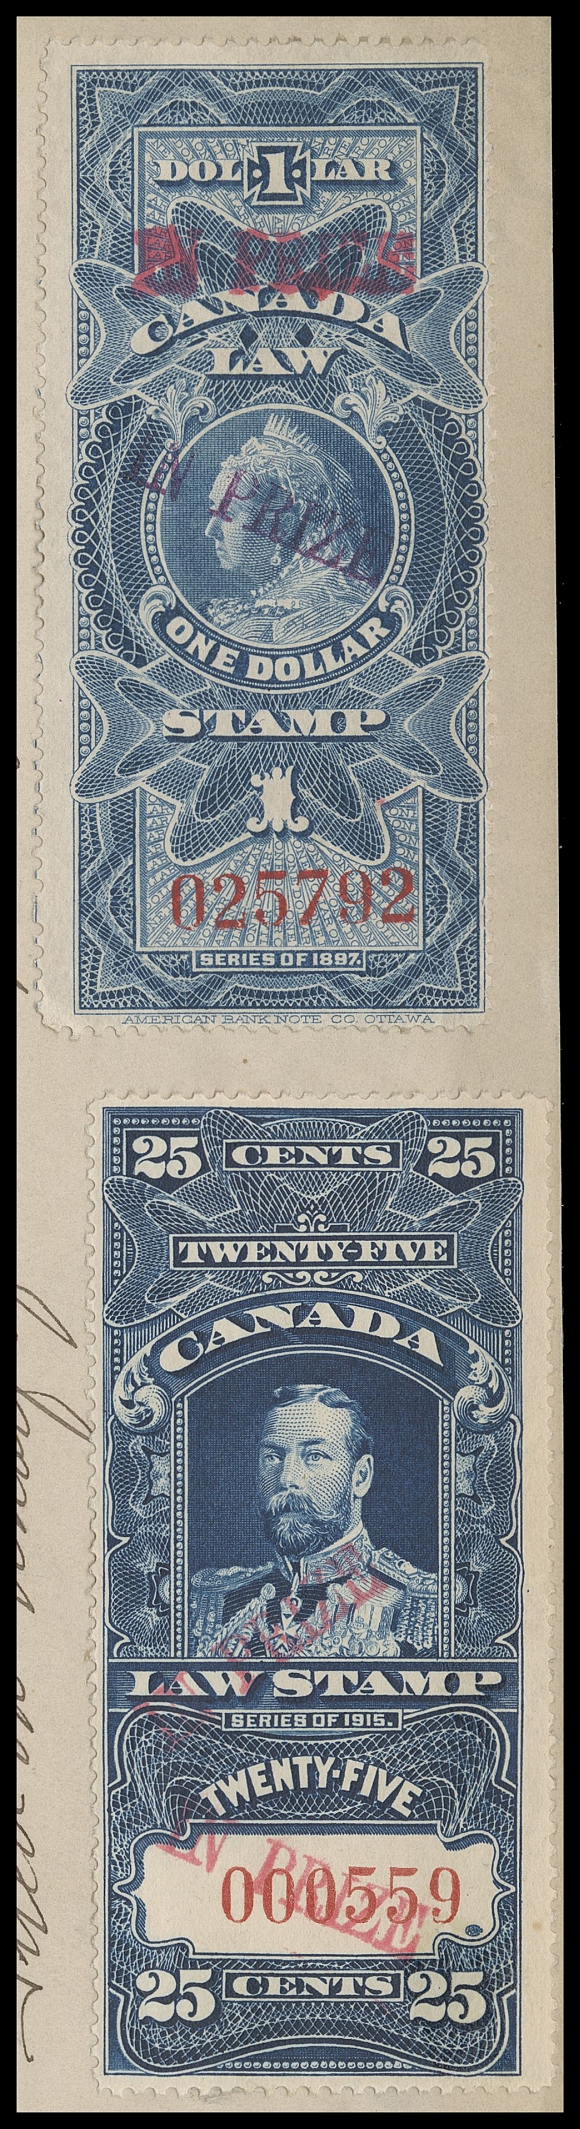 CANADA REVENUES (FEDERAL)  FSC30b, 31a,Two singles, serial numbers "025792" and "000559", former with DOUBLE OVERPRINT "IN PRIZE" IN RED AND IN PURPLE, the latter being the exceedingly rare DOUBLE OVERPRINT in red; both are in brilliant, fresh and choice condition, affixed uncancelled on first page of "The Leonor" two-page Affidavit of A.P. Luxton, handstamped Exchequer Court IN PRIZE with manuscript "Filed 3rd Jan 1917", initialed "O.B." (Oswald Barton). A highly desirable document in an excellent state of preservation, franked with what is believed to be the ONLY KNOWN EXAMPLE OF THE 25 CENT KGV DOUBLE "IN PRIZE" OVERPRINT either on or off document, VF (Cat. value for stamps) Also includes "Minutes of Filing" document which accompanied the Affidavit.